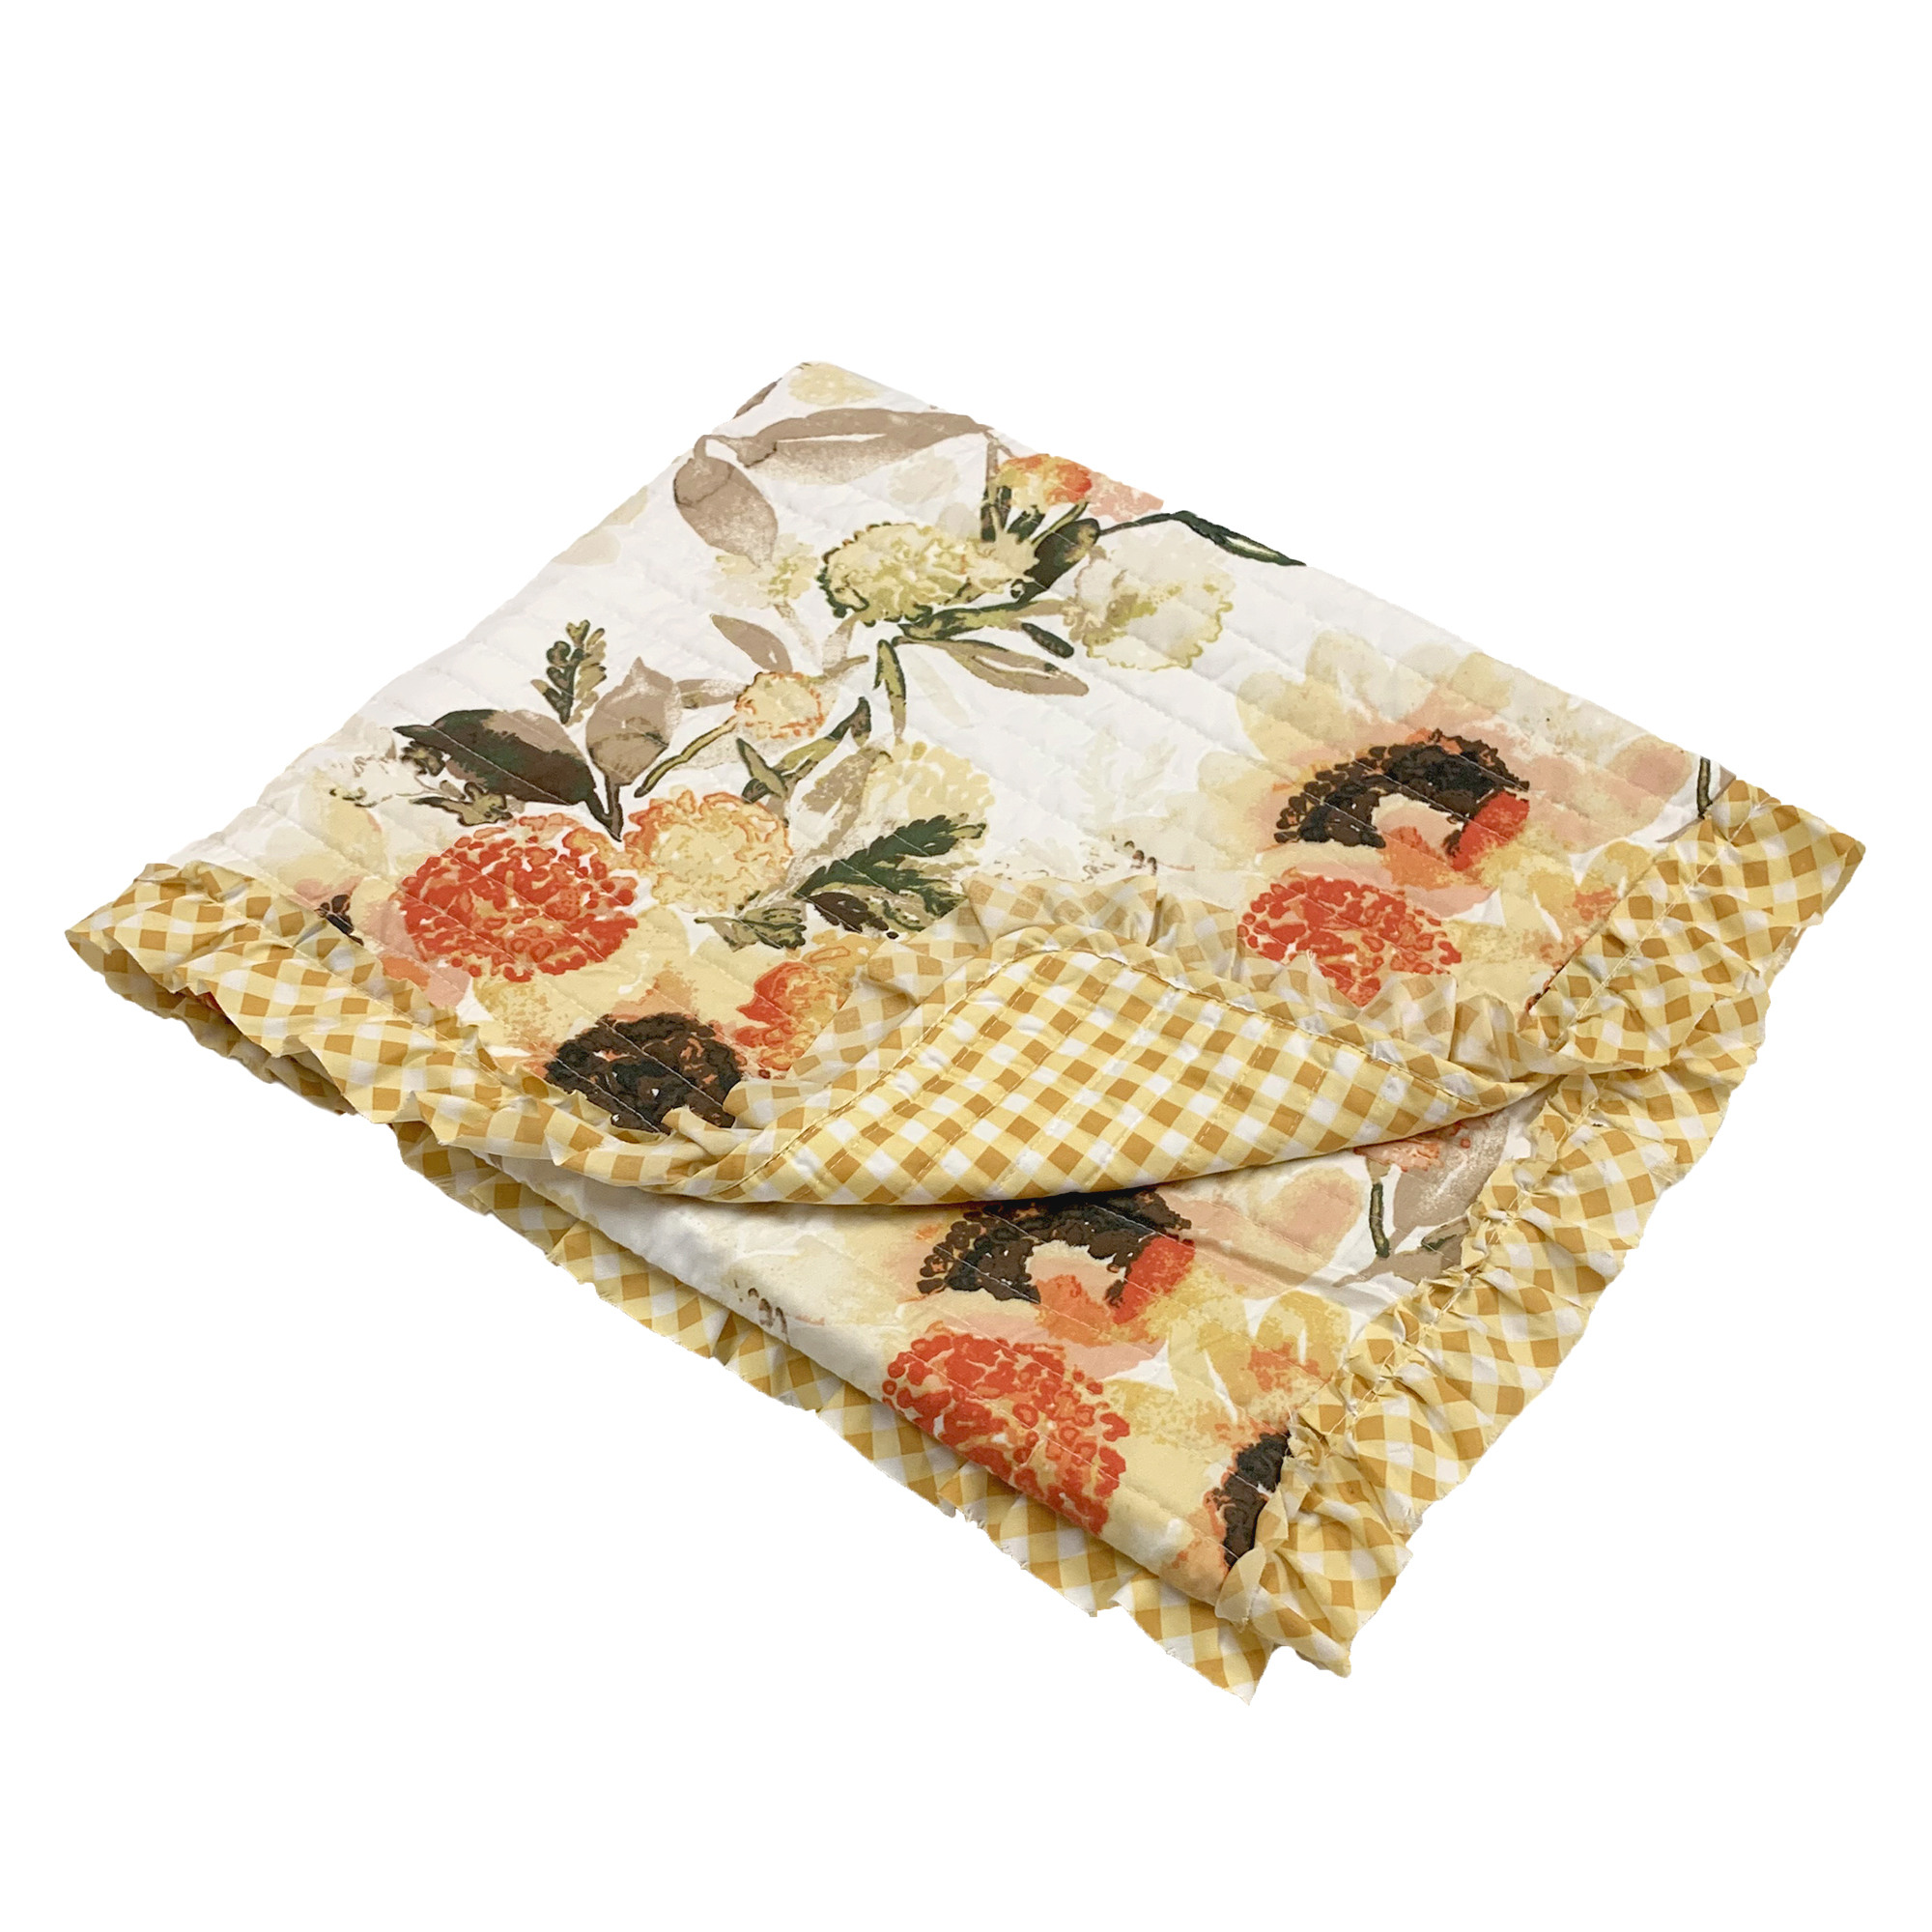 Kelsa 50 X 60 Channel Quilted Throw Blanket, Cotton Fill, Gold Sunflowers- Saltoro Sherpi